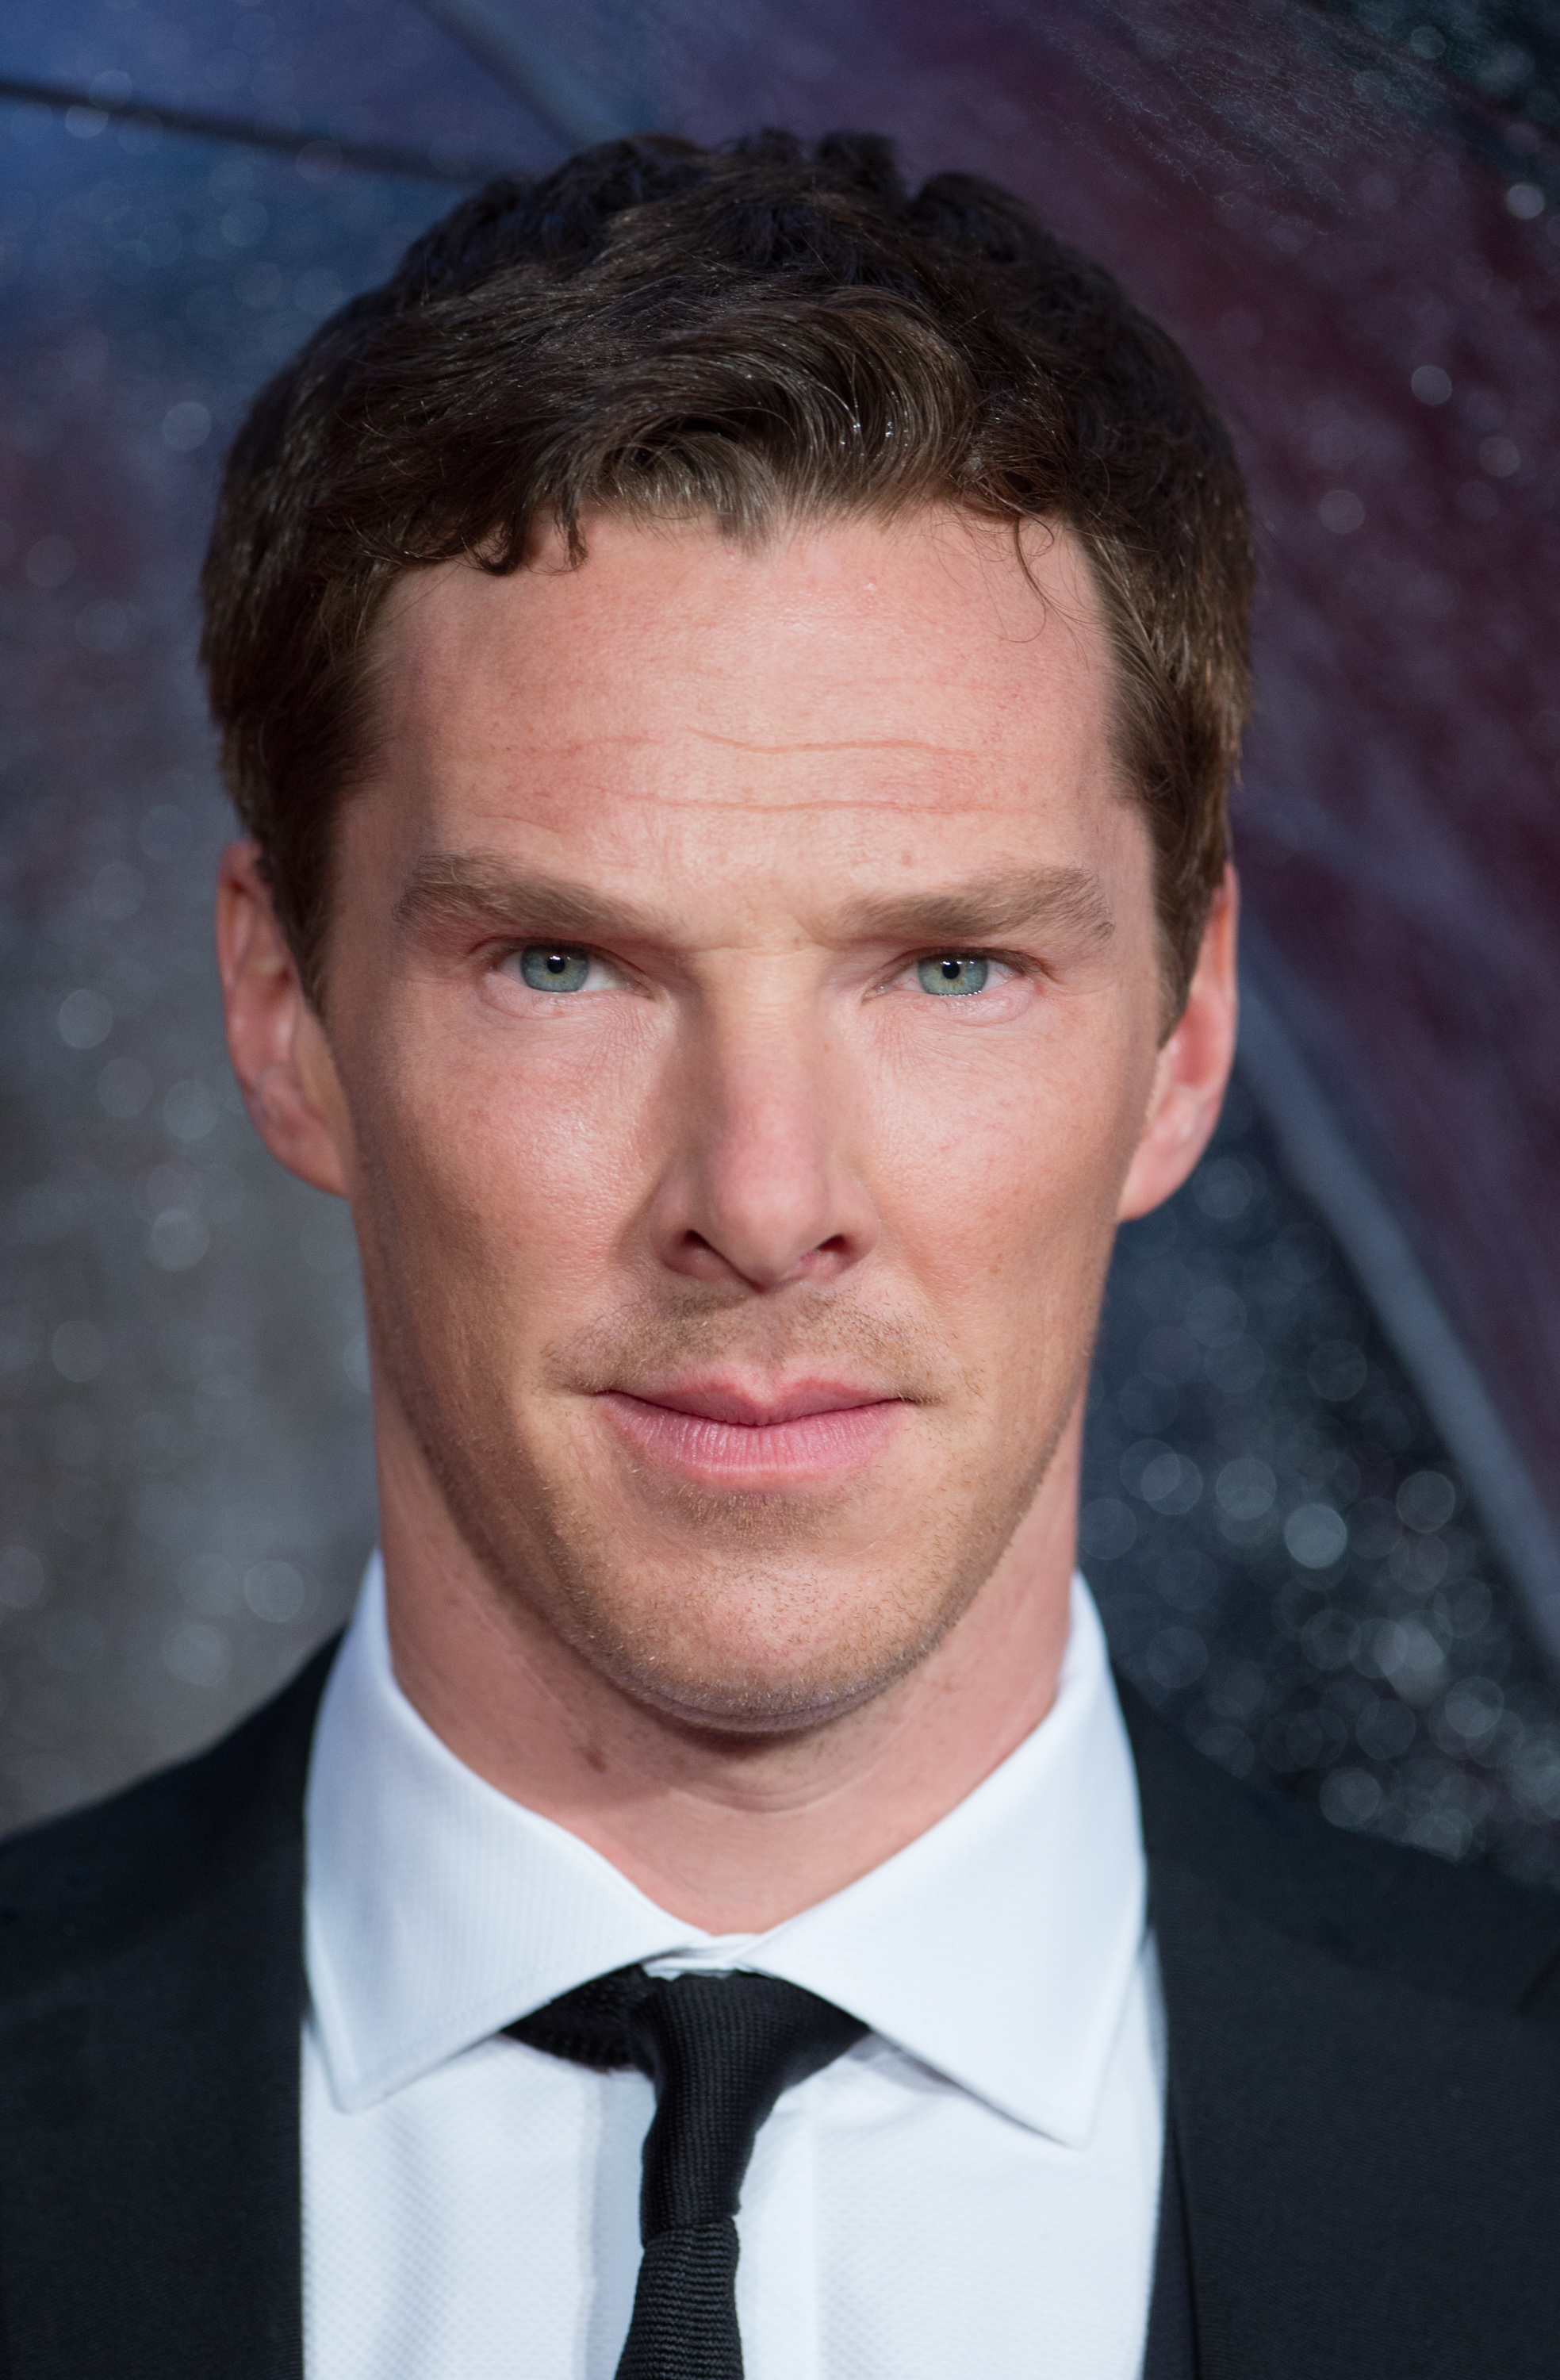 Benedict Cumberbatch attends a screening of "The Imitation Game" on the opening night gala of the 58th BFI London Film Festival at Odeon Leicester Square on October 8, 2014 in London, England. (Samir Hussein&mdash;WireImage)